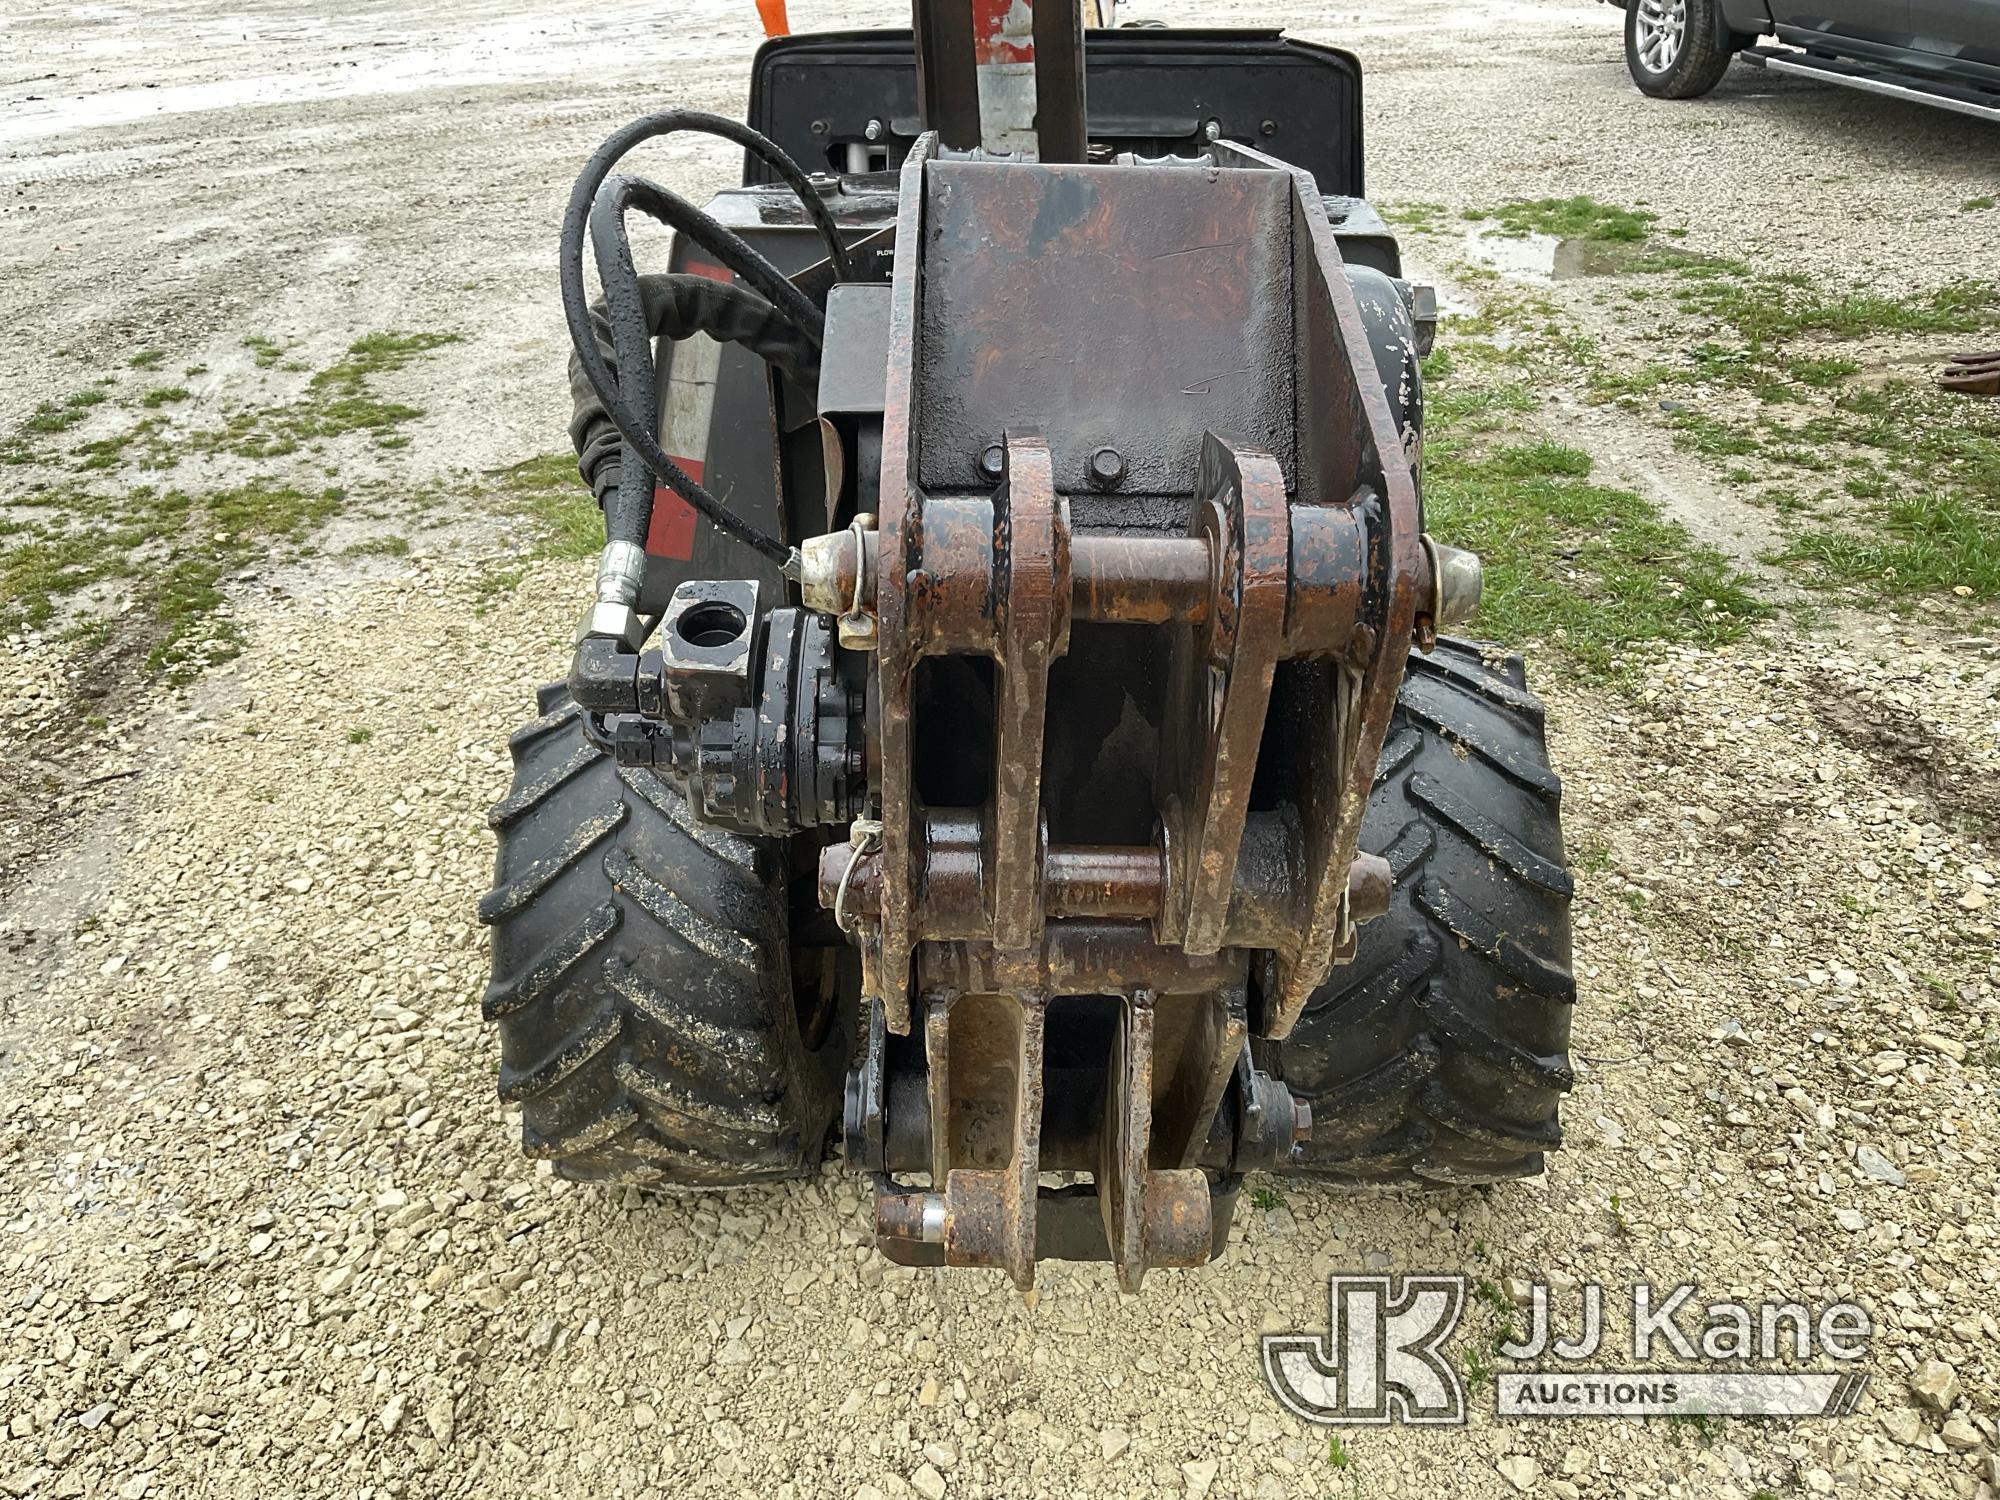 (Orleans, IN) 2003 Ditch Witch 410SXC Walk Beside Articulating Combo Trencher/Vibratory Cable Plow R